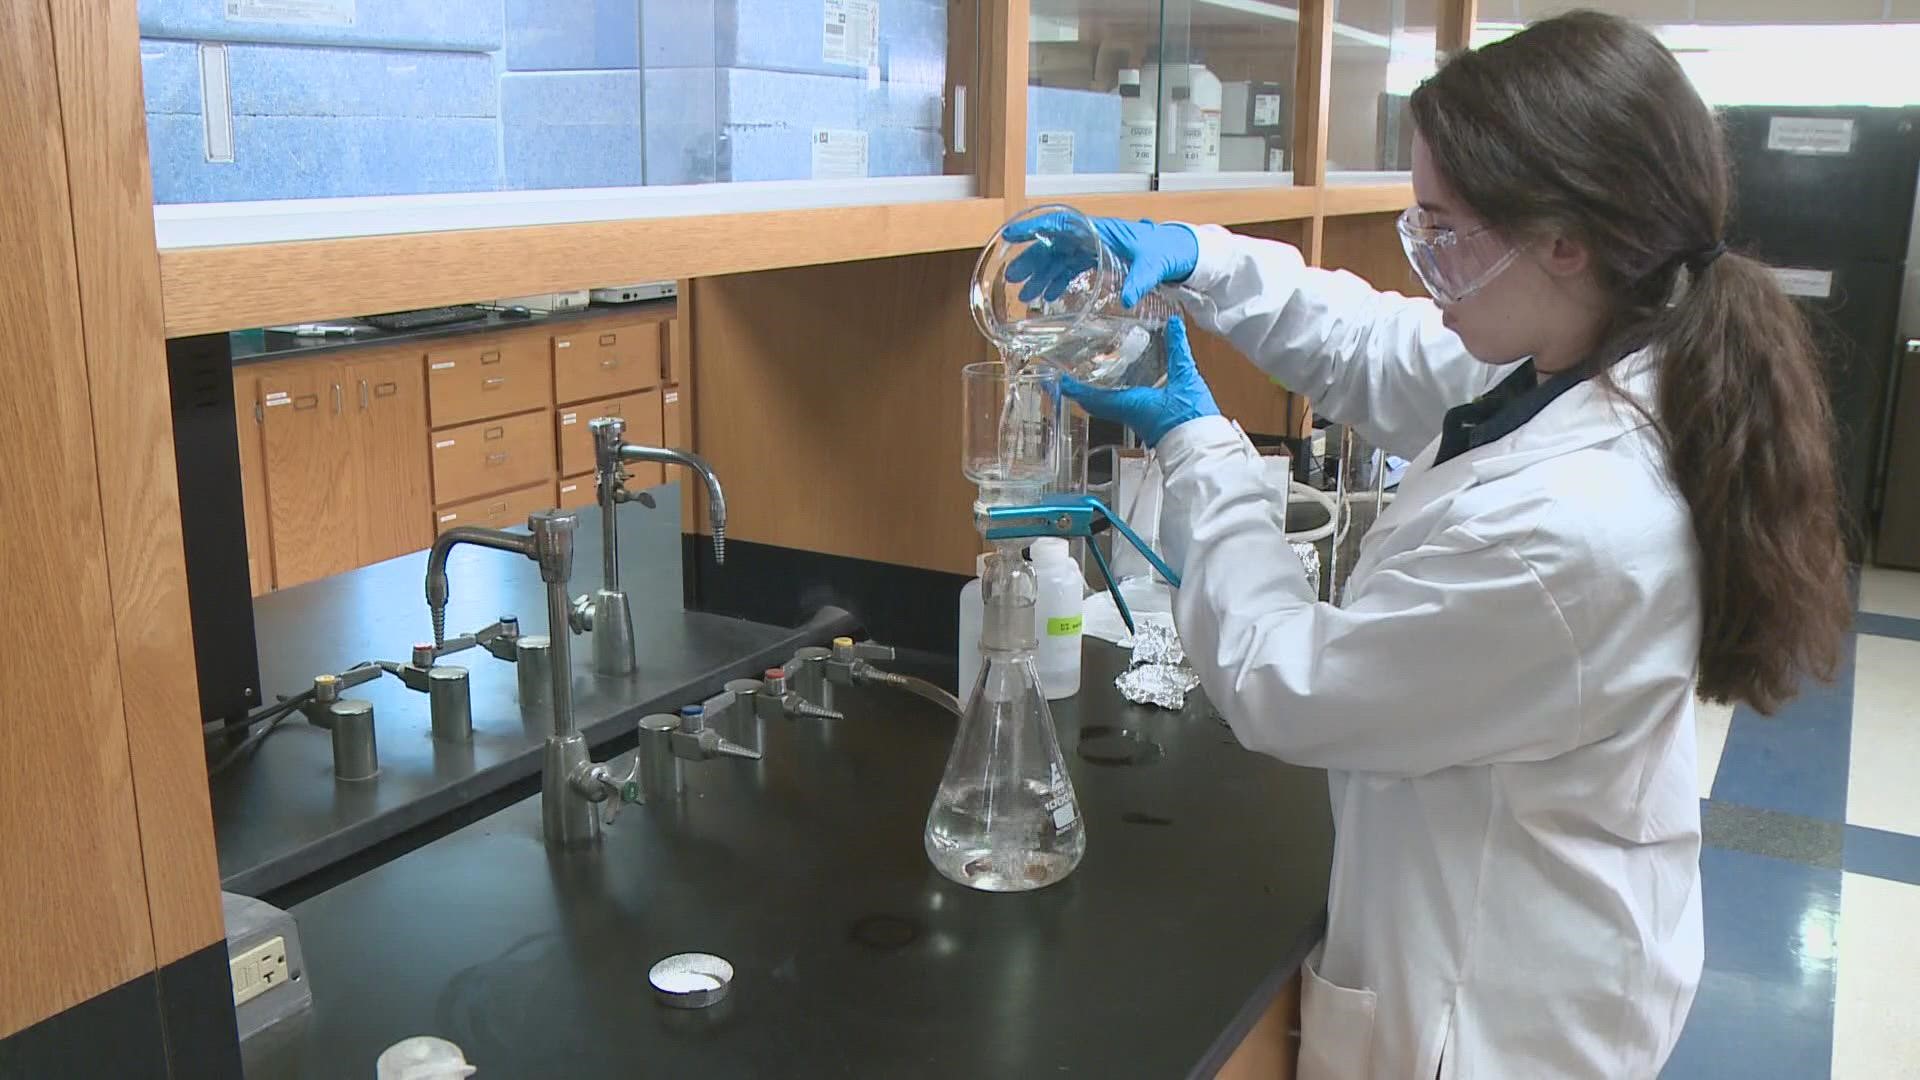 University of Maine researchers are using existing water filtration technology to try and find a solution to a growing public health crisis.